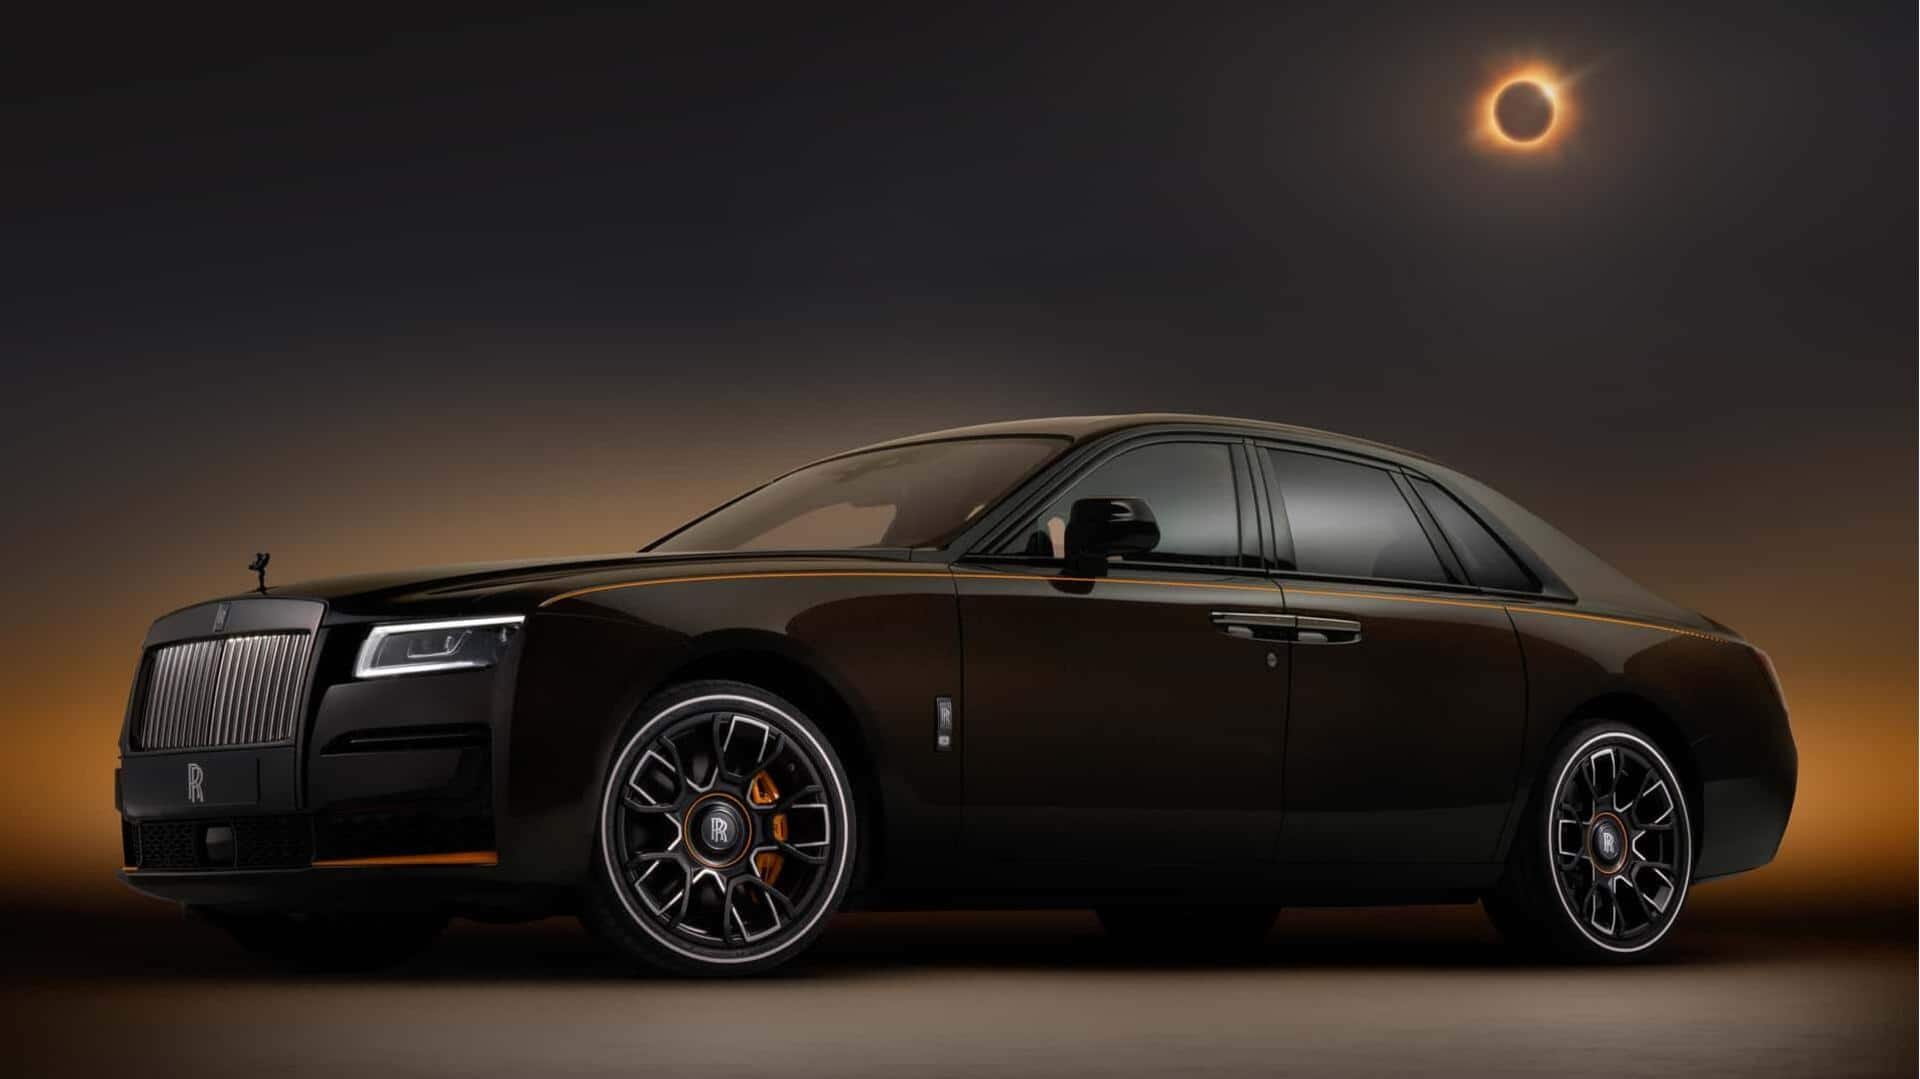 Rolls-Royce's latest Ghost Black Badge is inspired by solar eclipse